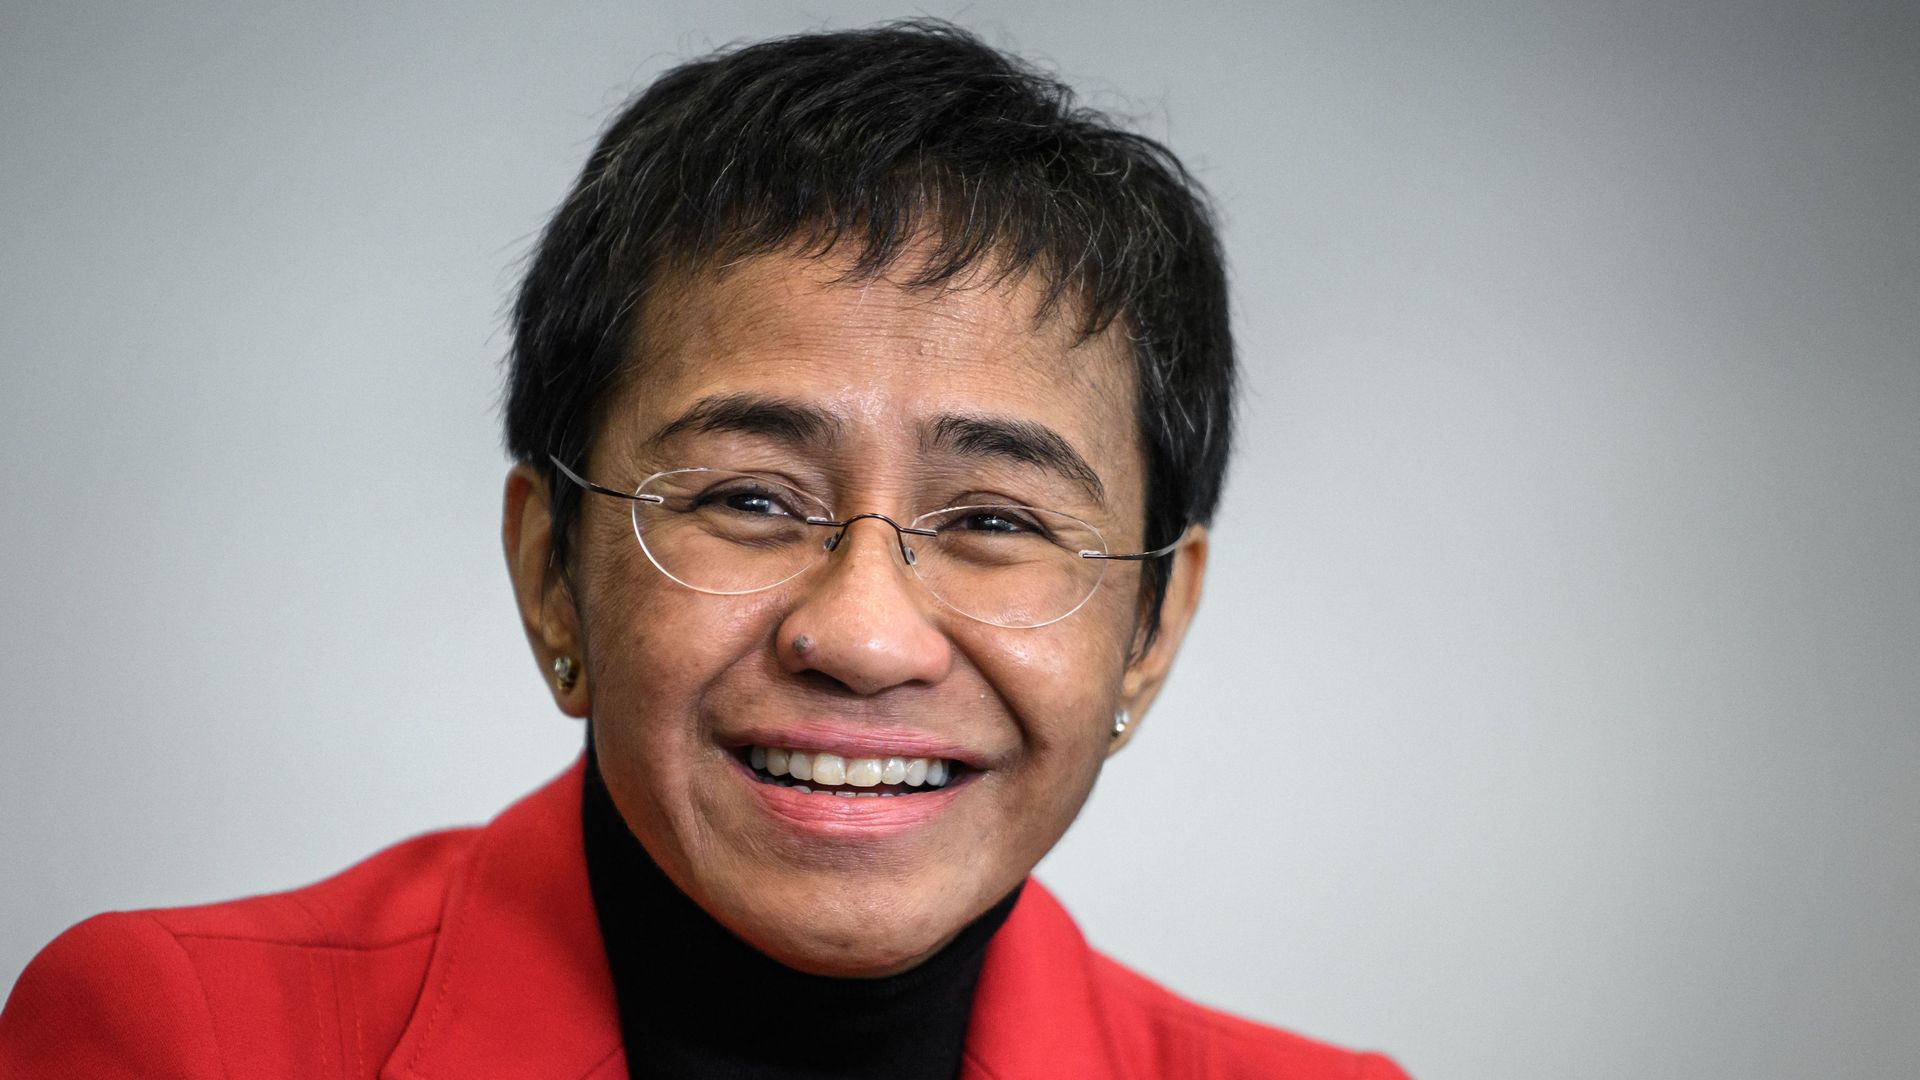 Photo of Maria Ressa smiling wearing glasses and a red jacket